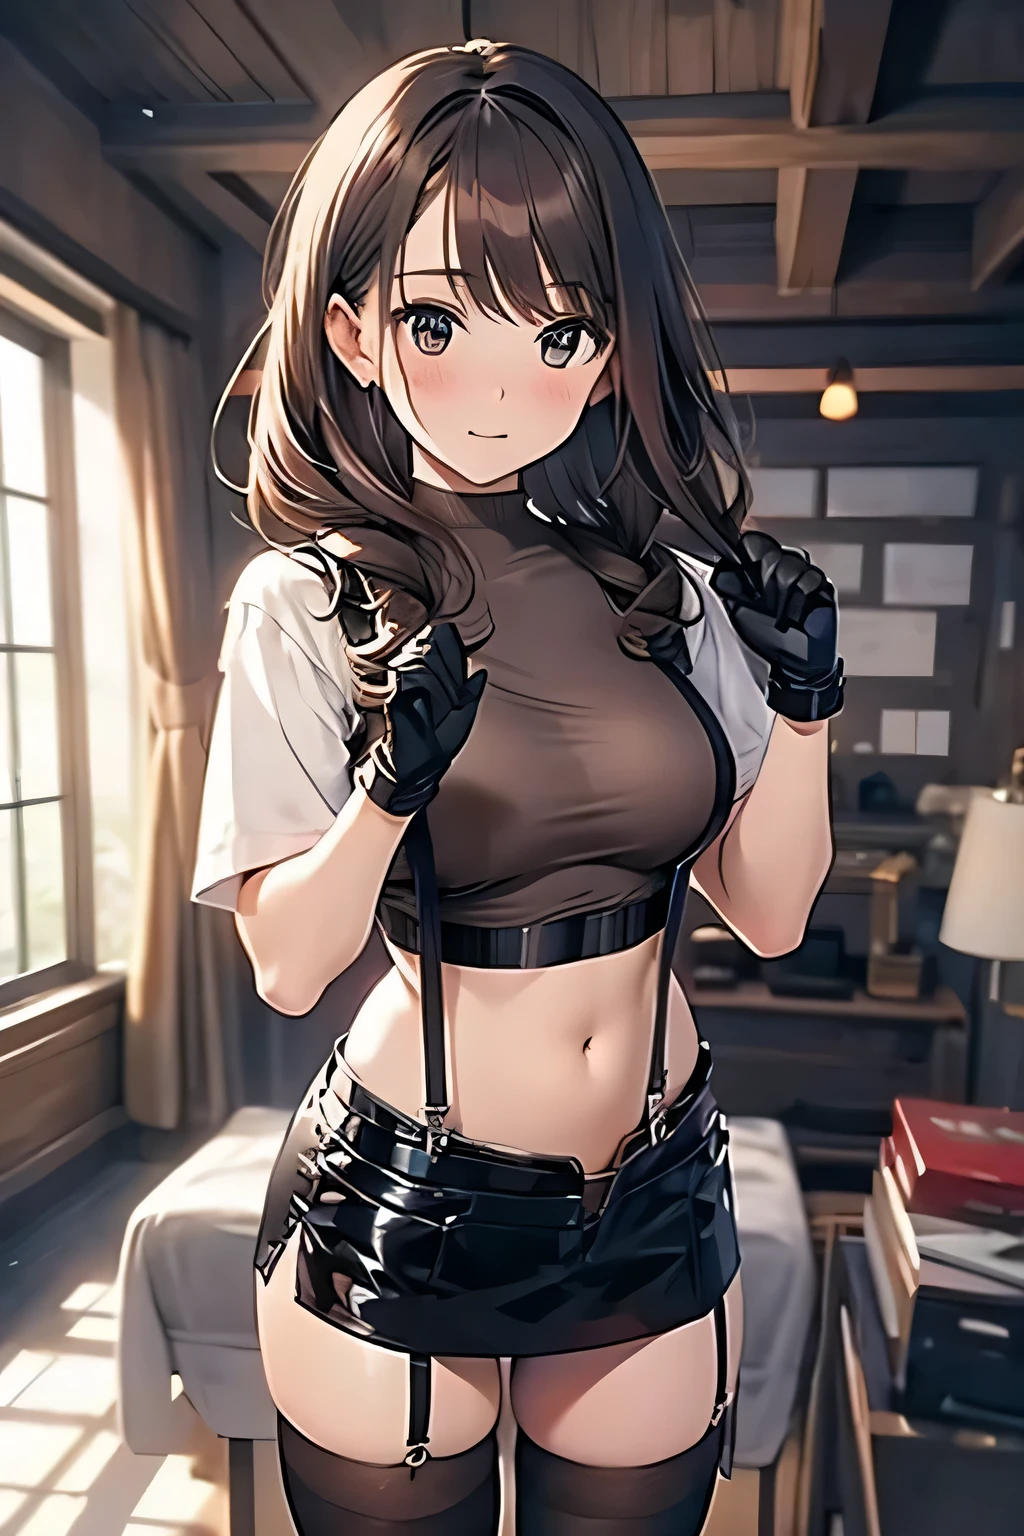 Brown hair、watching at viewers　　　black suspenders　　　bulging big tits　　 　 　　　walls: 　Black miniskirt　garters　　　　　　Gaze　　　a small face　bangss 　　　holster　　　Beautuful Women　　Hands up　　レッグholster ベッドに横たわる　　Gaze 　black boots panty shot　Provocation　flank　flank汗　Single hand gloves　arms are